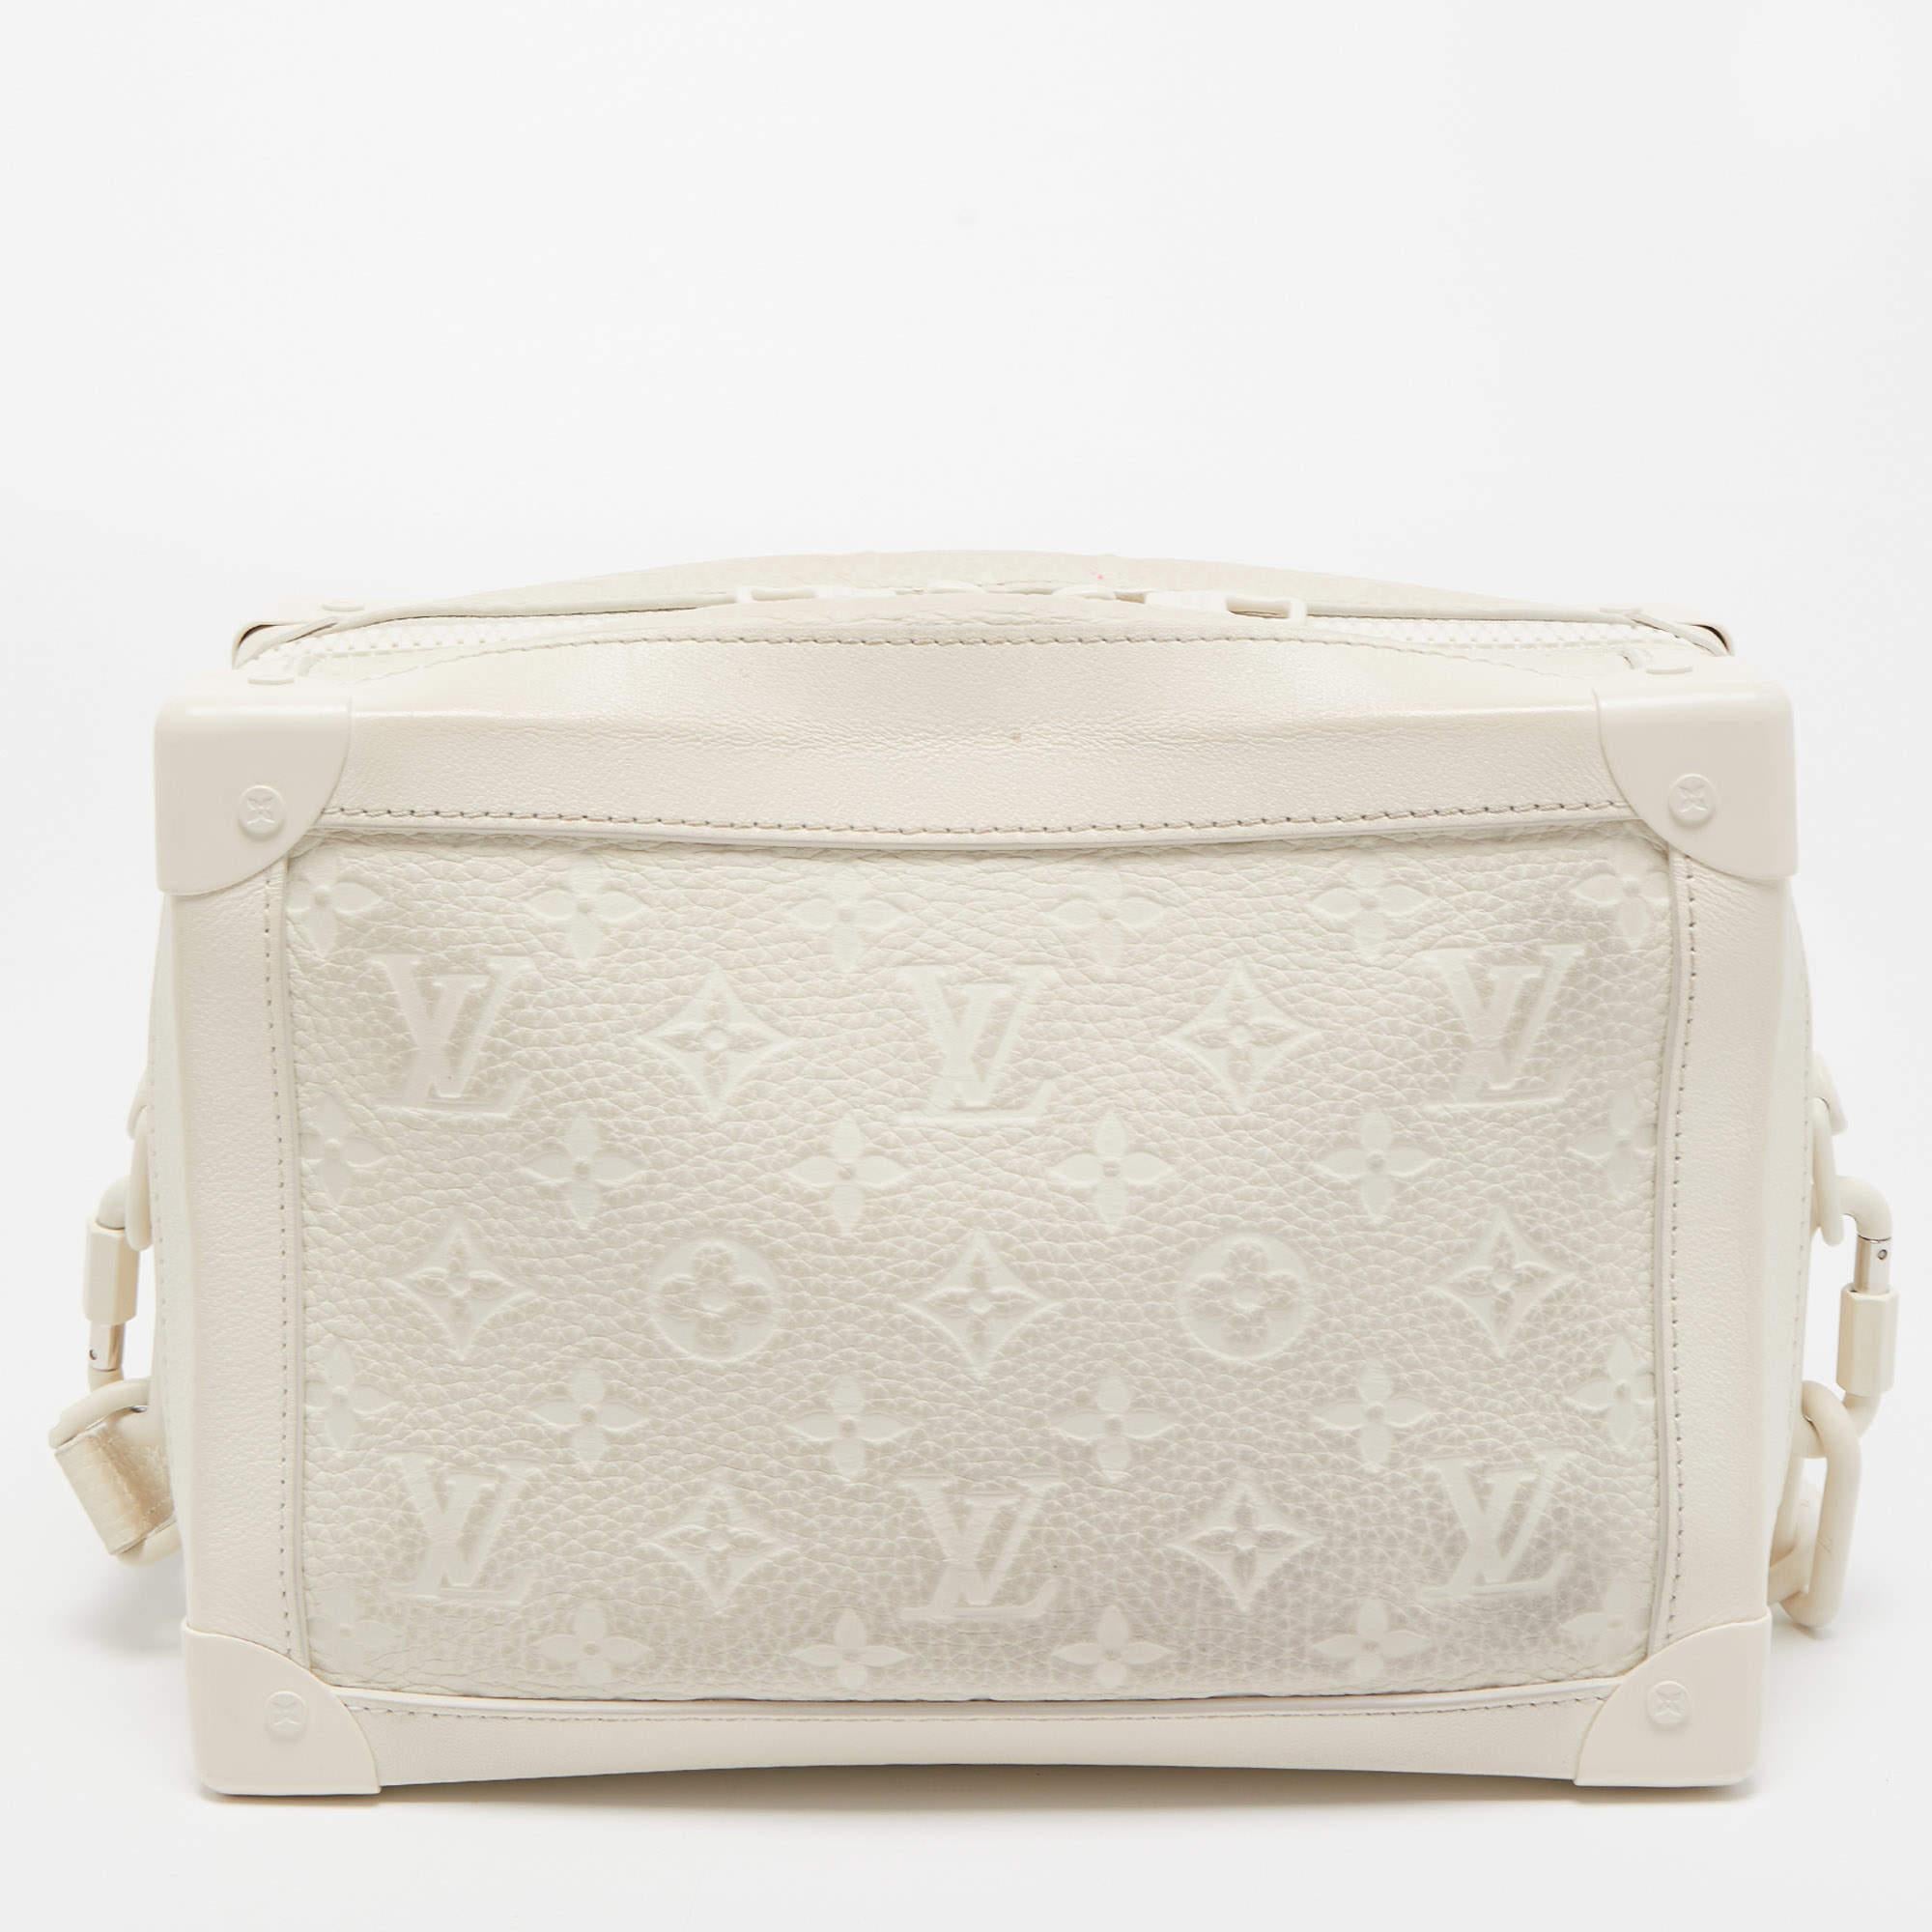 This LV Legacy Soft Trunk bag is an accessory you would go to season after season. It has been crafted using the best kind of materials to be appealing as well as durable. It's a worthy investment.

Includes: Detachable Strap
